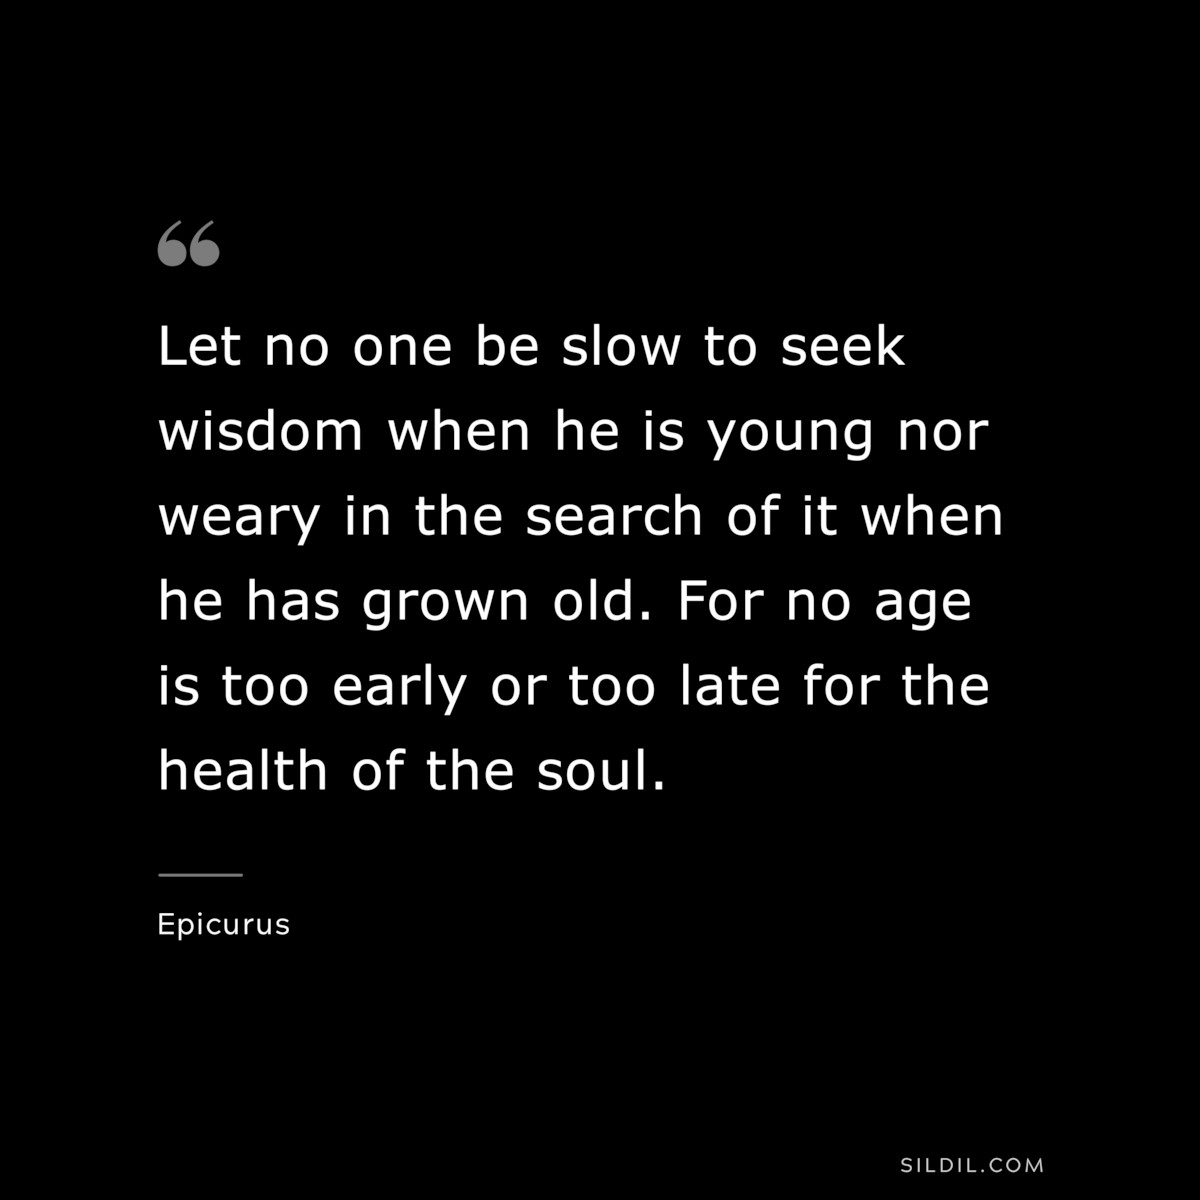 Let no one be slow to seek wisdom when he is young nor weary in the search of it when he has grown old. For no age is too early or too late for the health of the soul. — Epicurus